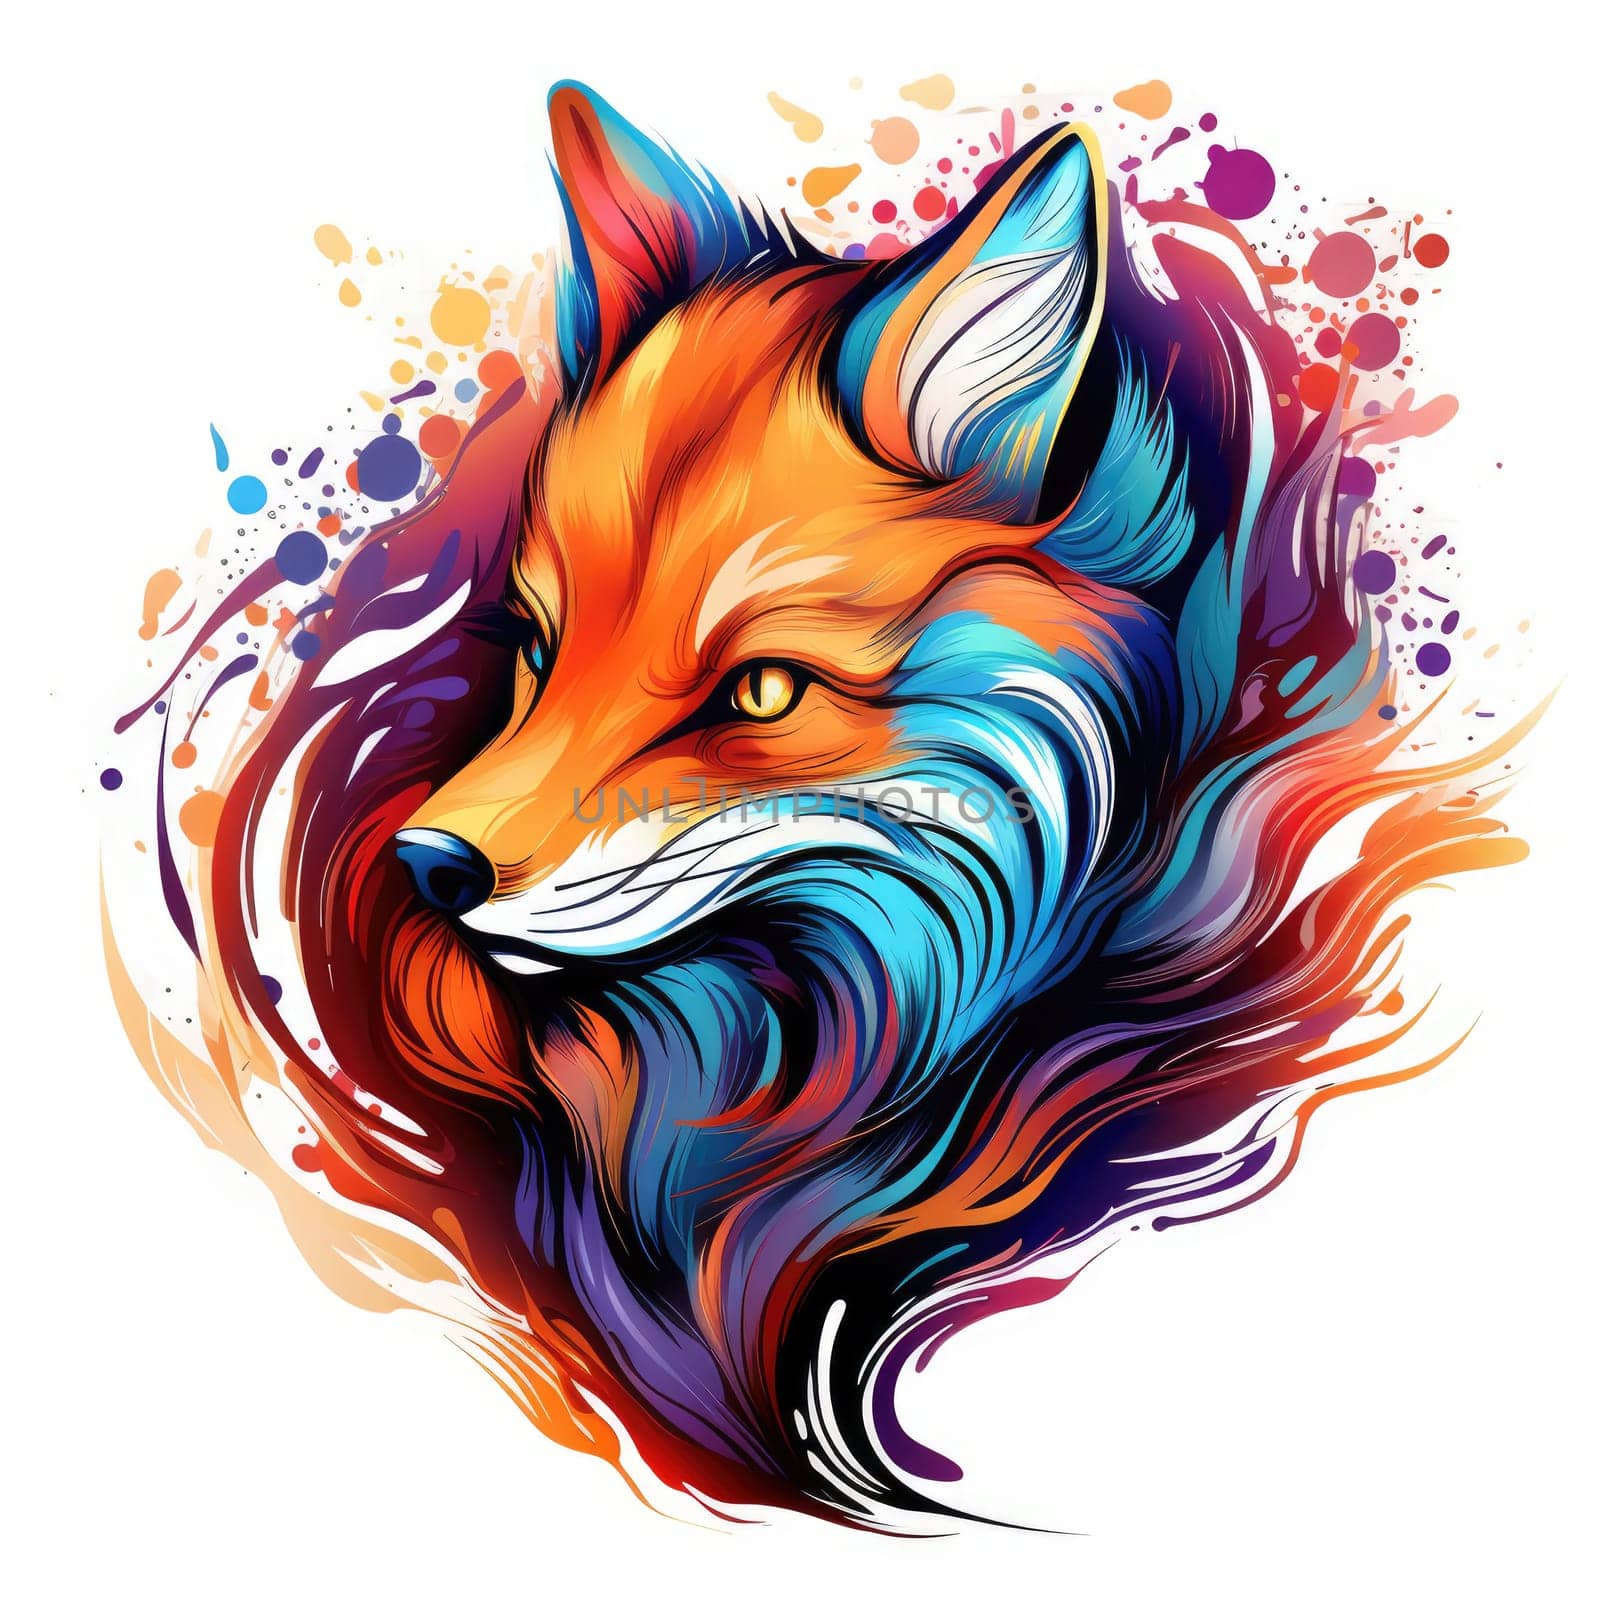 Decorative art style image of fox isolated on white background as a graphic design element for poster, t-shirt print, sticker, logo, etc.